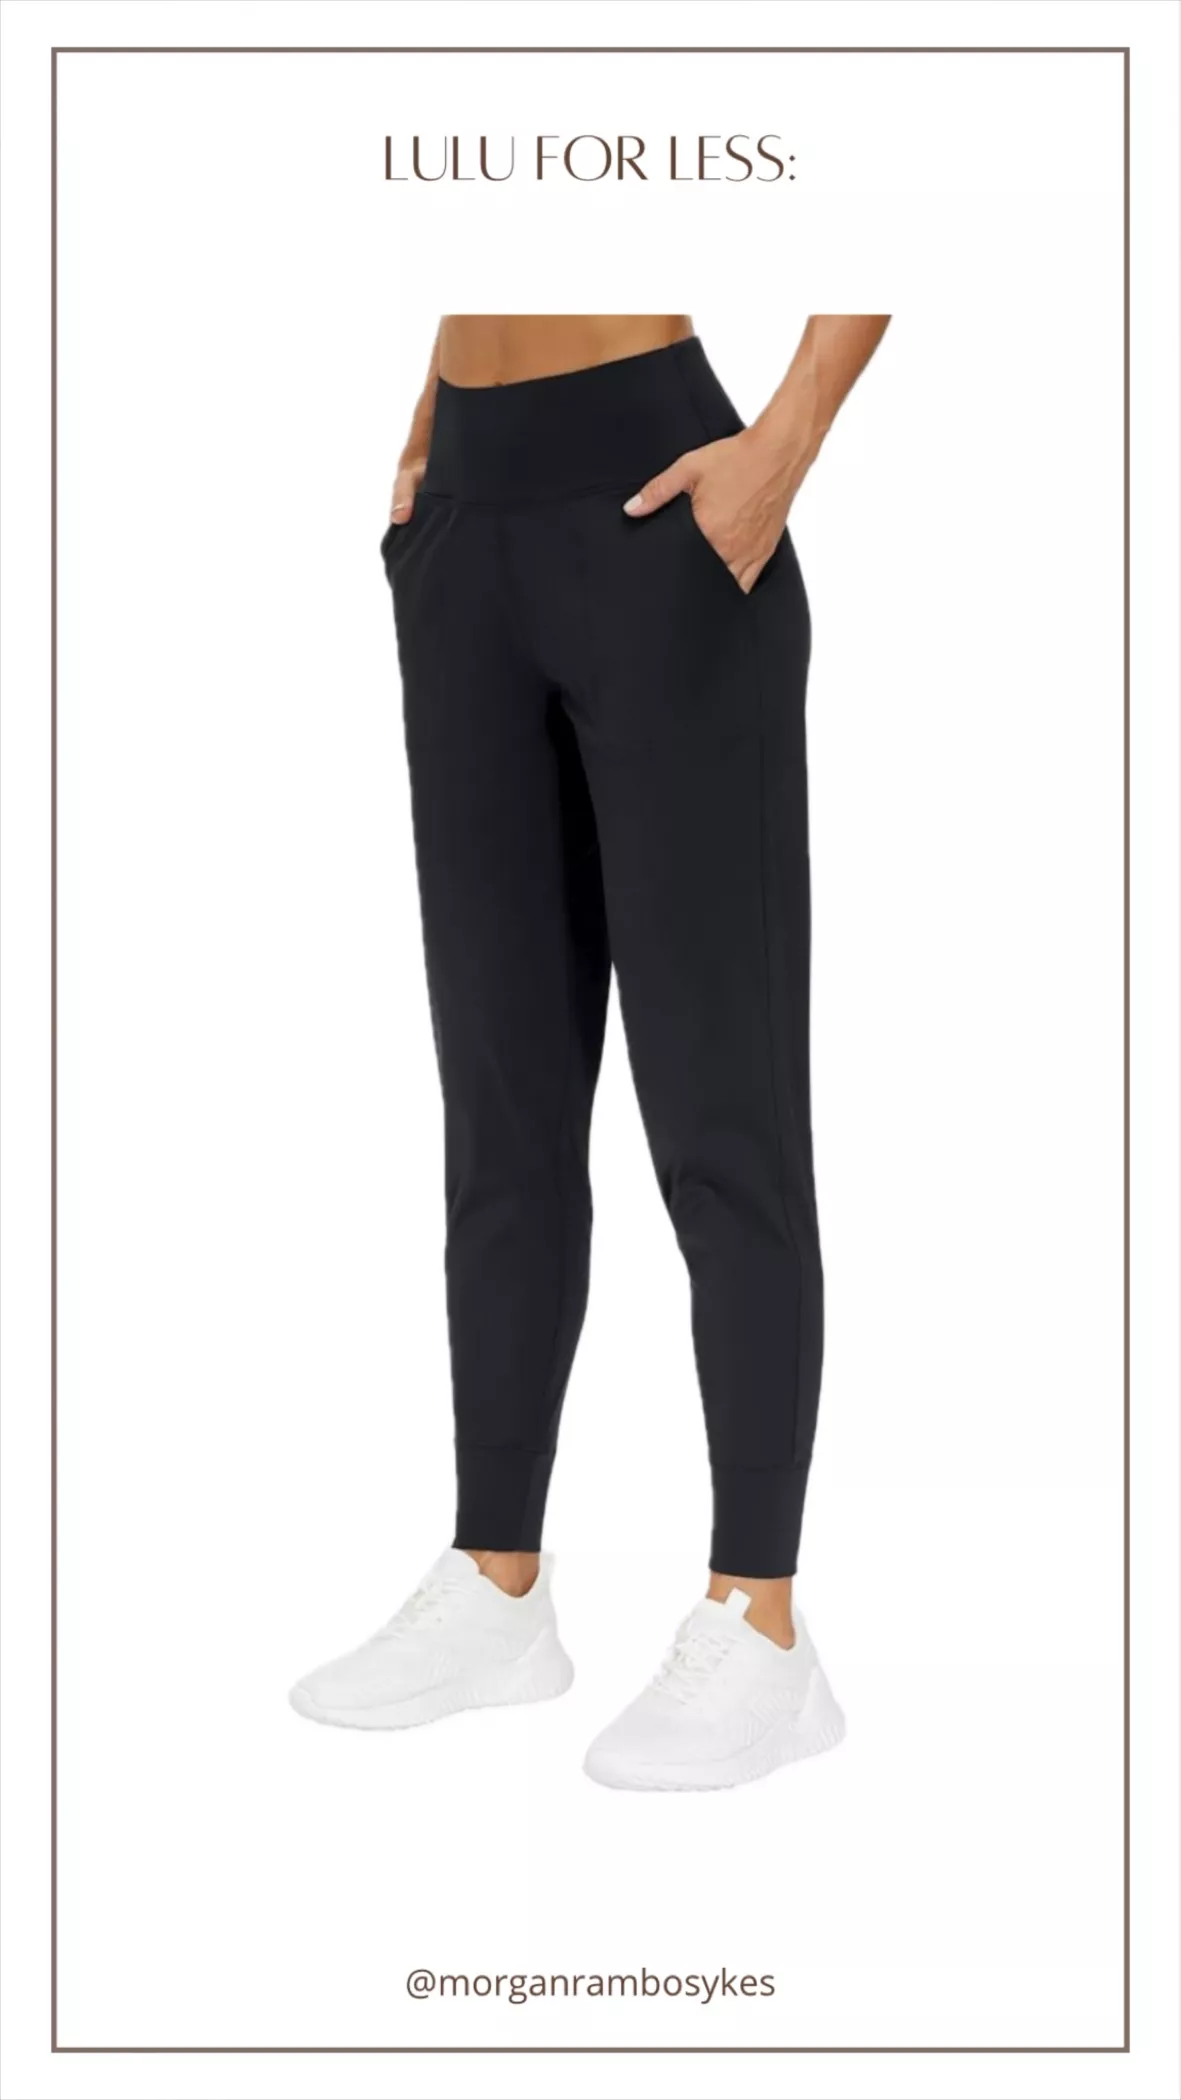 THE GYM PEOPLE Women's Joggers Pants Lightweight Athletic Leggings